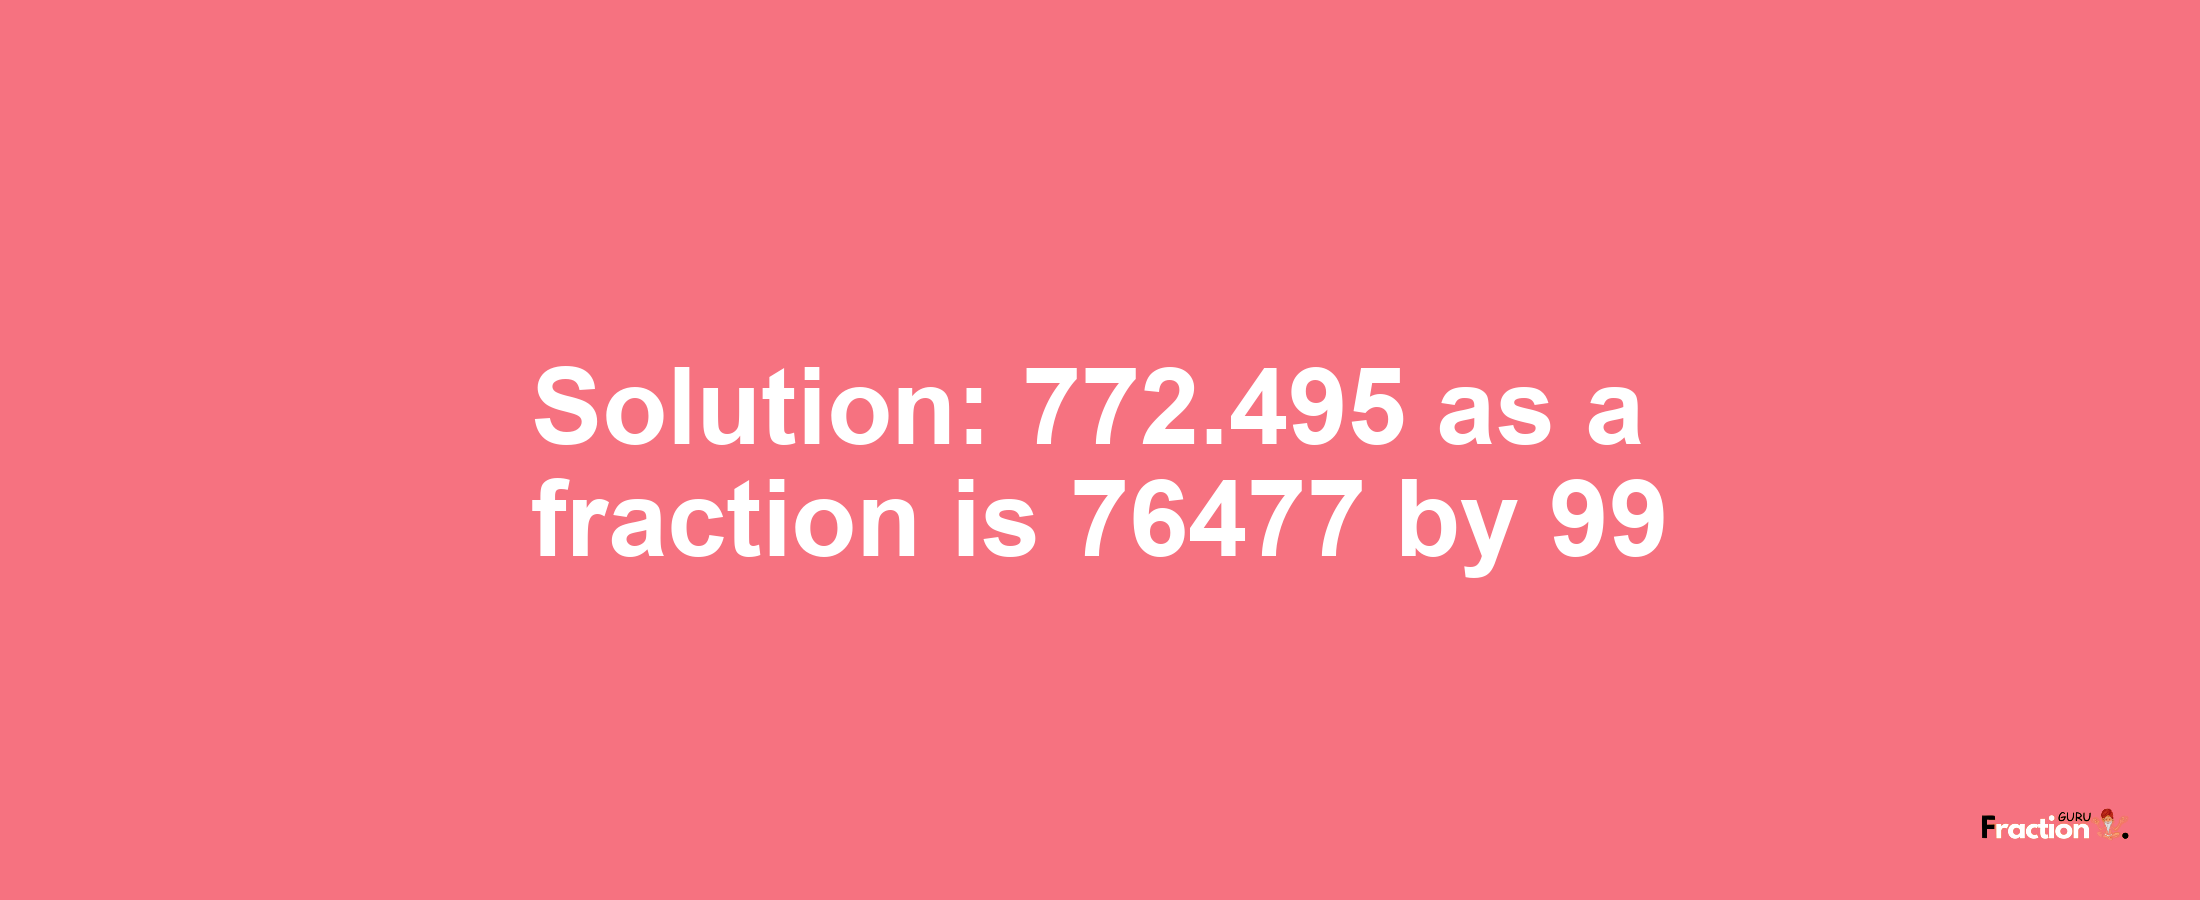 Solution:772.495 as a fraction is 76477/99